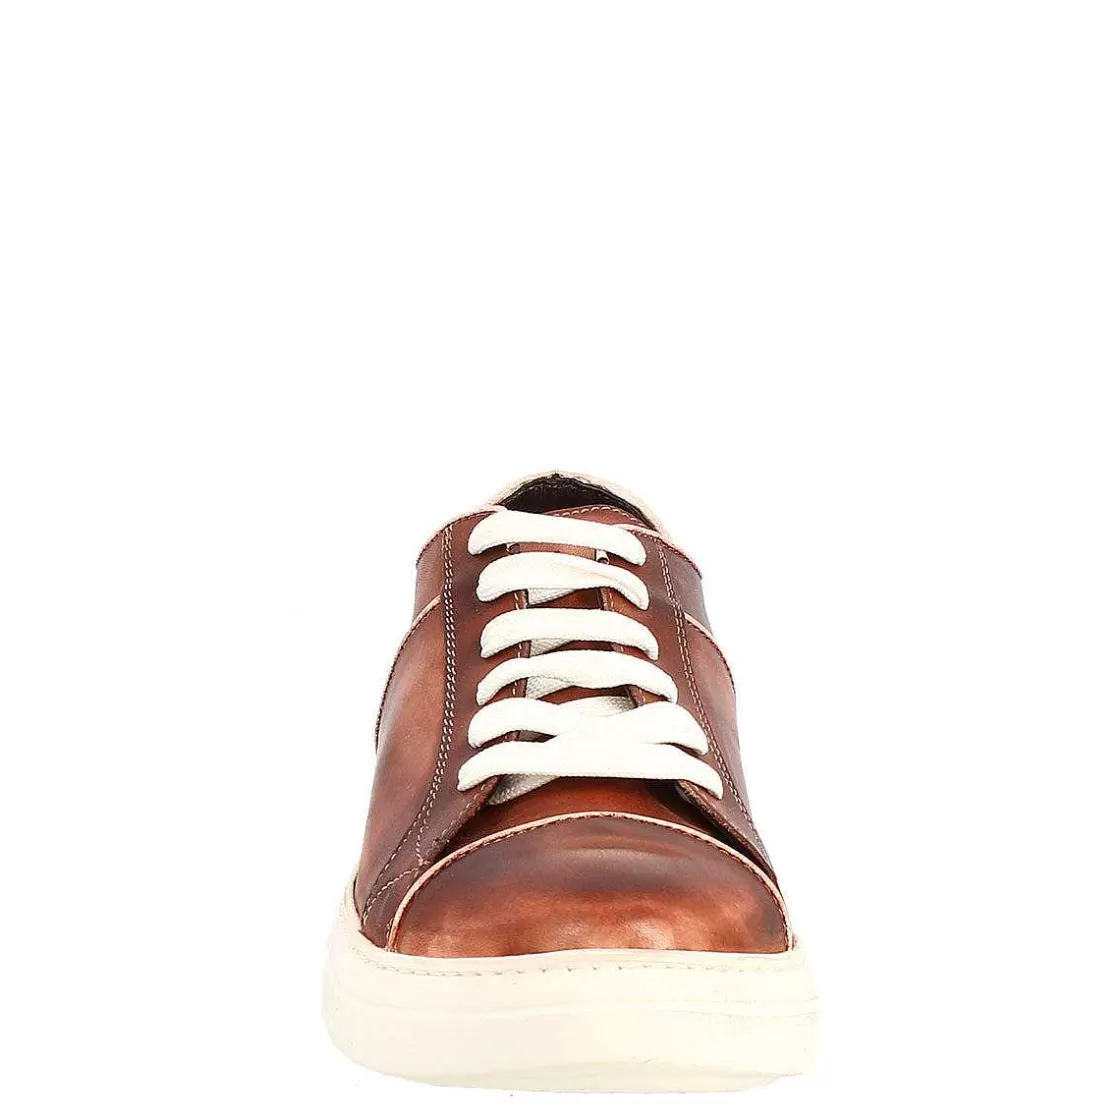 Leonardo Men'S Vintage Brown Leather Sneakers Made And Colored By Hand Shop